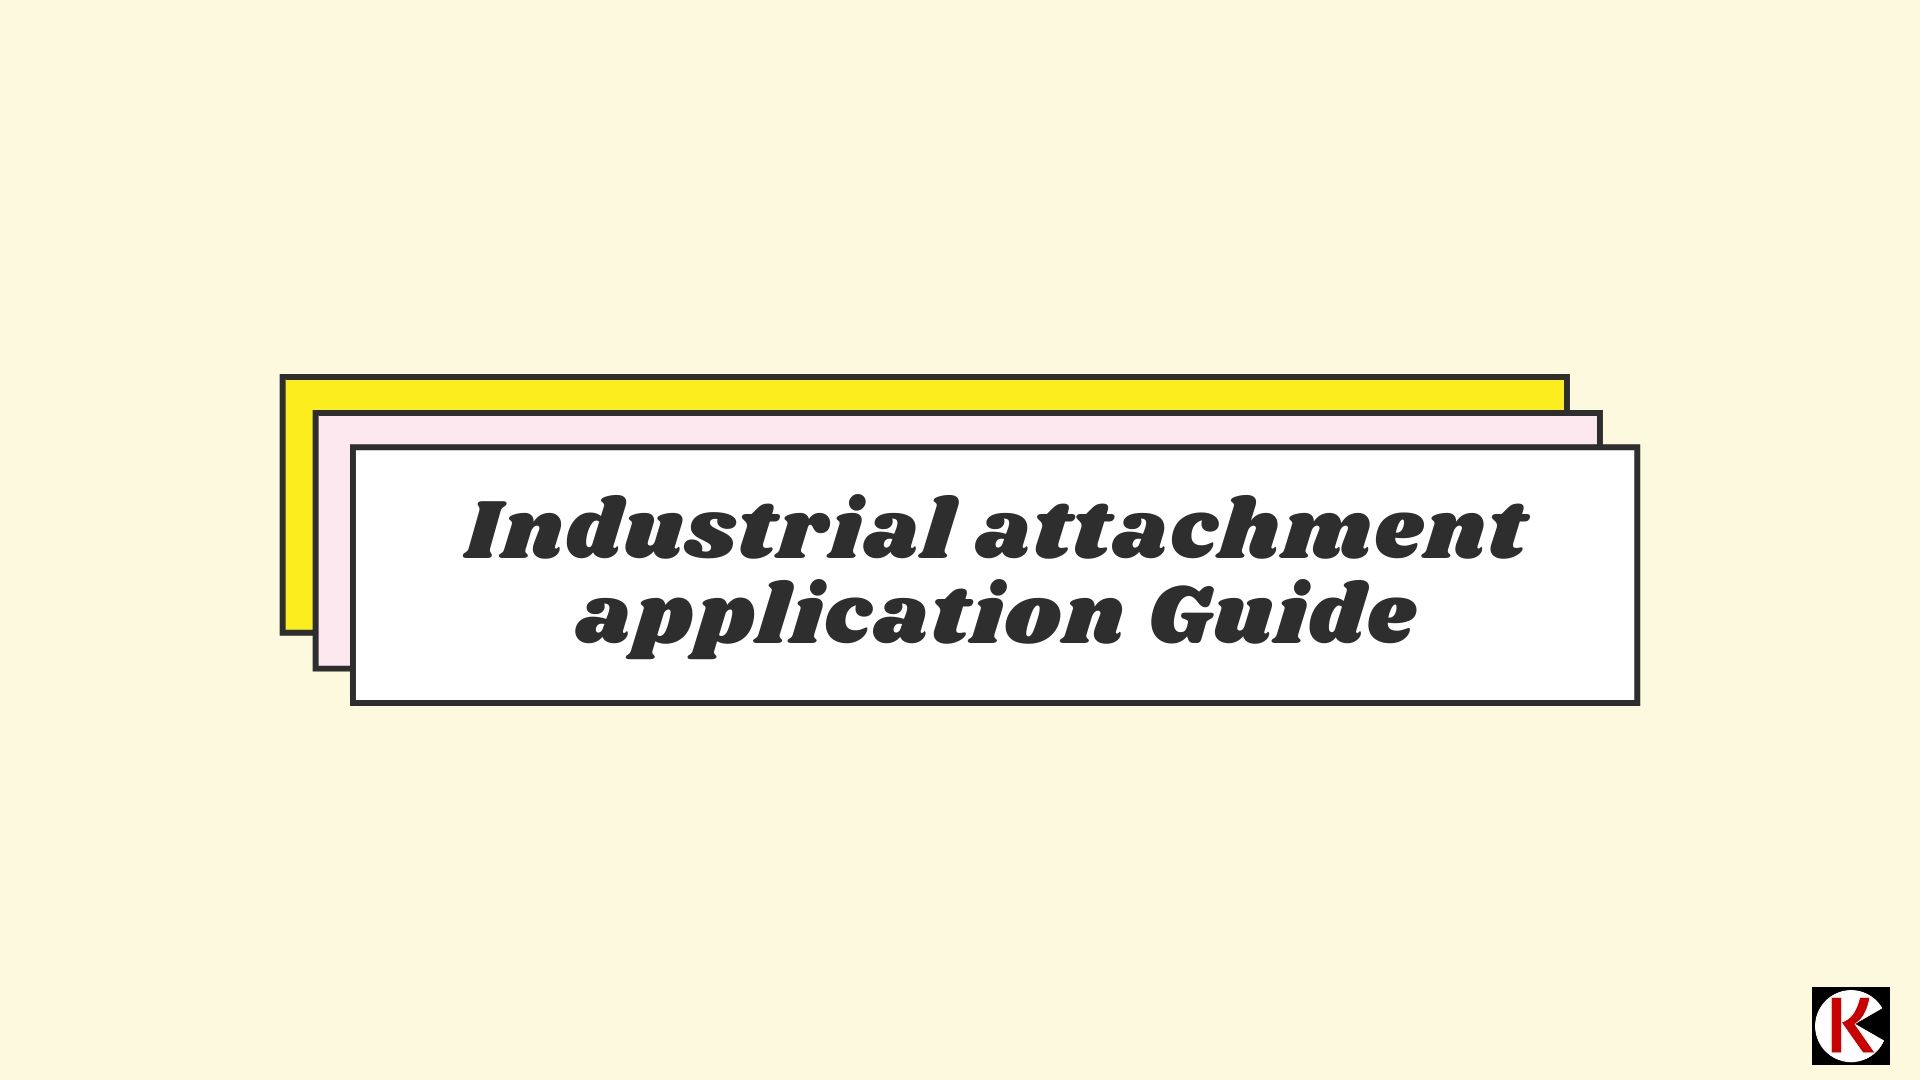 How to Apply For University Industrial Attachment